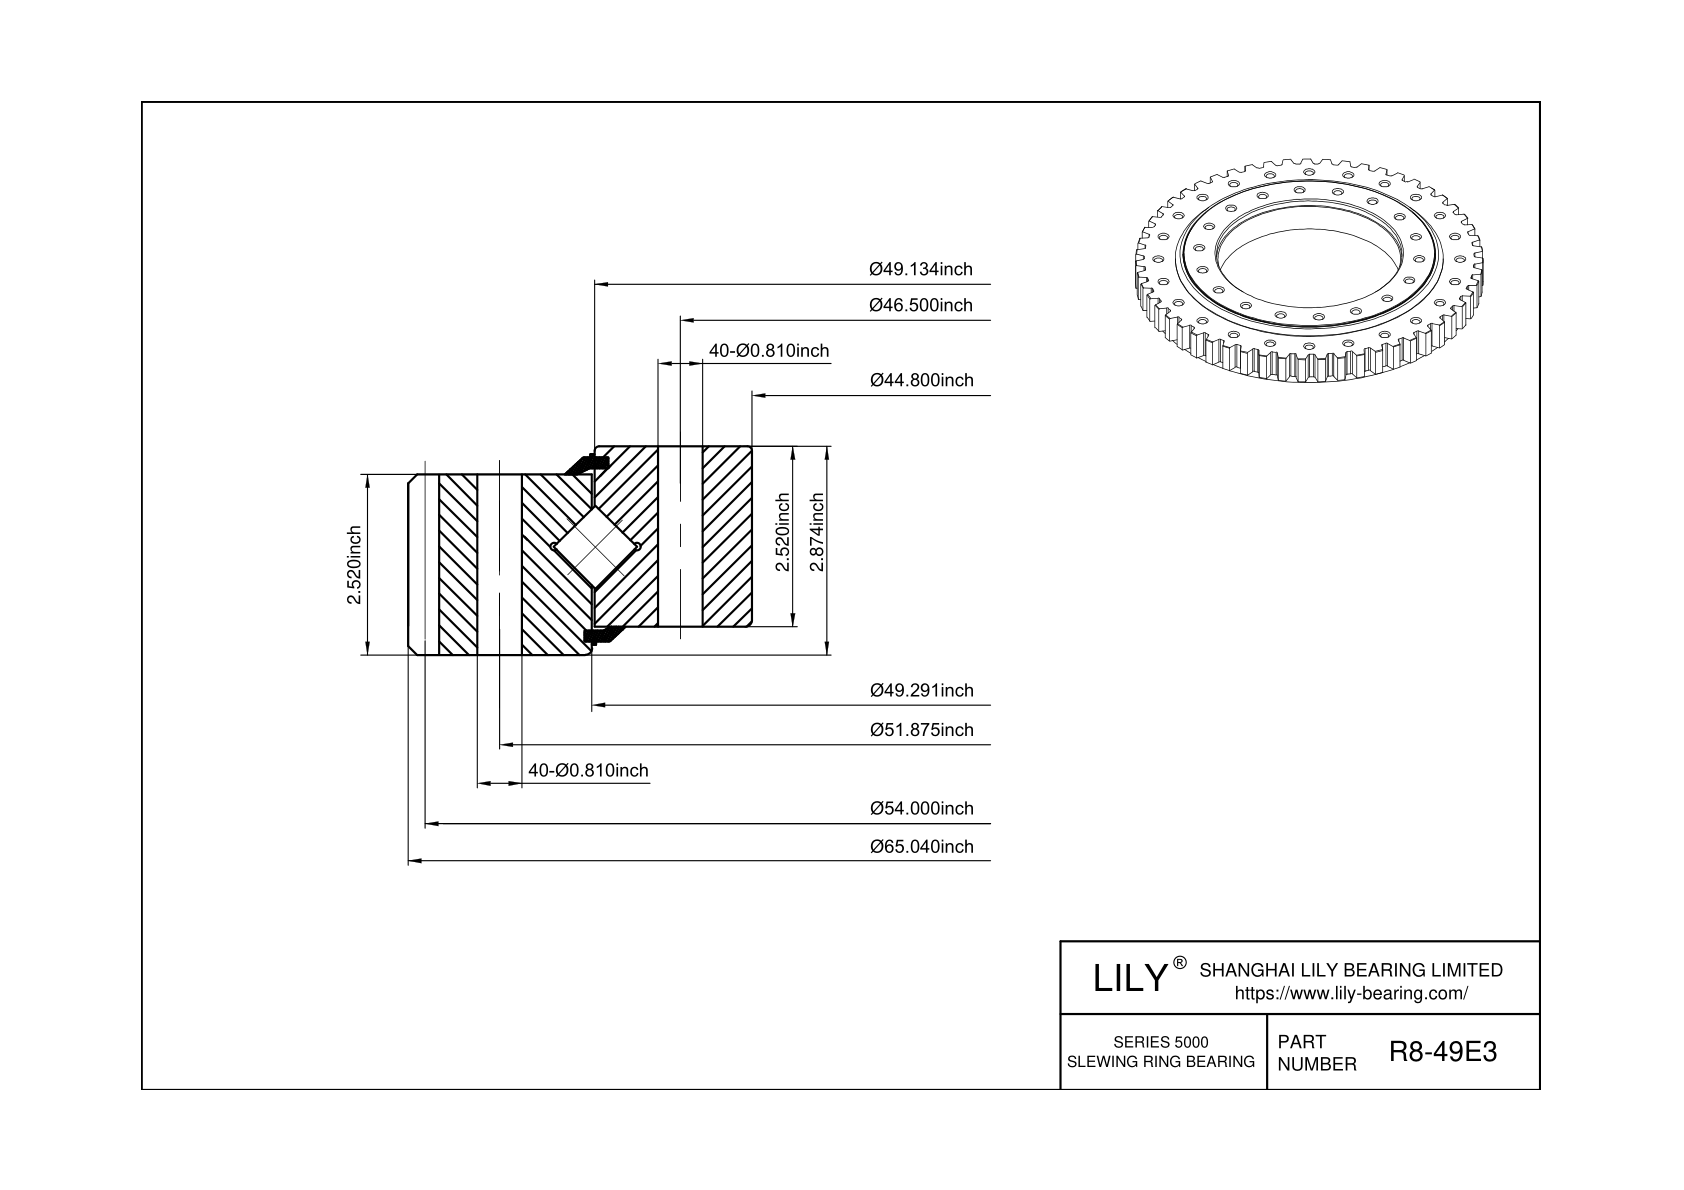 R8-49E3 Cross Roller Slewing Ring Bearing cad drawing